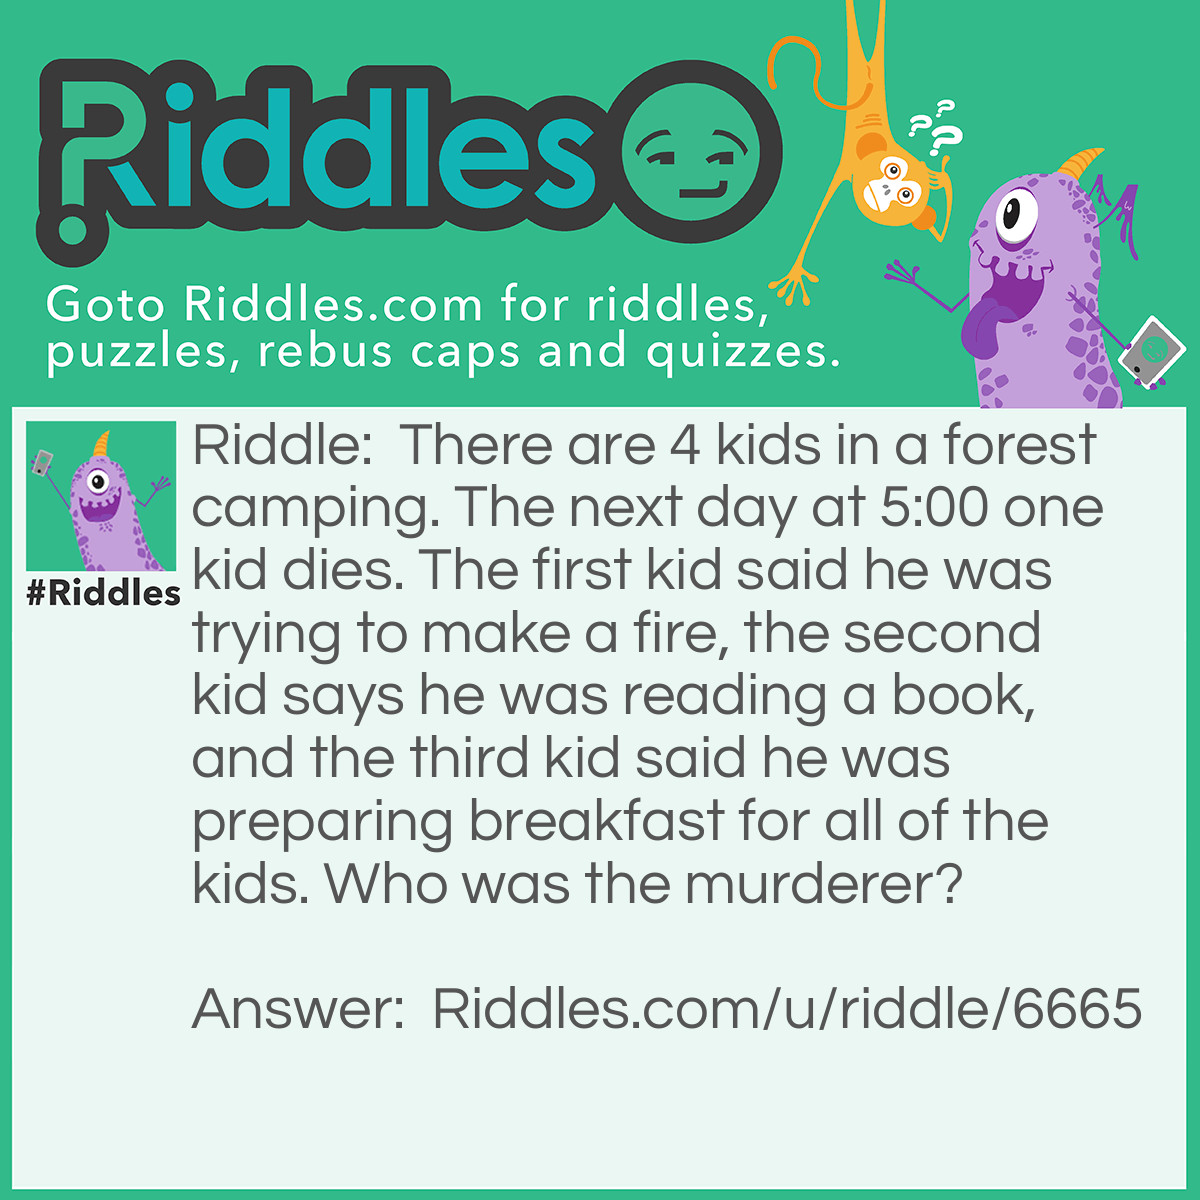 Riddle: There are 4 kids in a forest camping. The next day at 5:00 one kid dies. The first kid said he was trying to make a fire, the second kid says he was reading a book, and the third kid said he was preparing breakfast for all of the kids. Who was the murderer? Answer: The third kid because it was 5:00 and you don't make breakfast at that time!